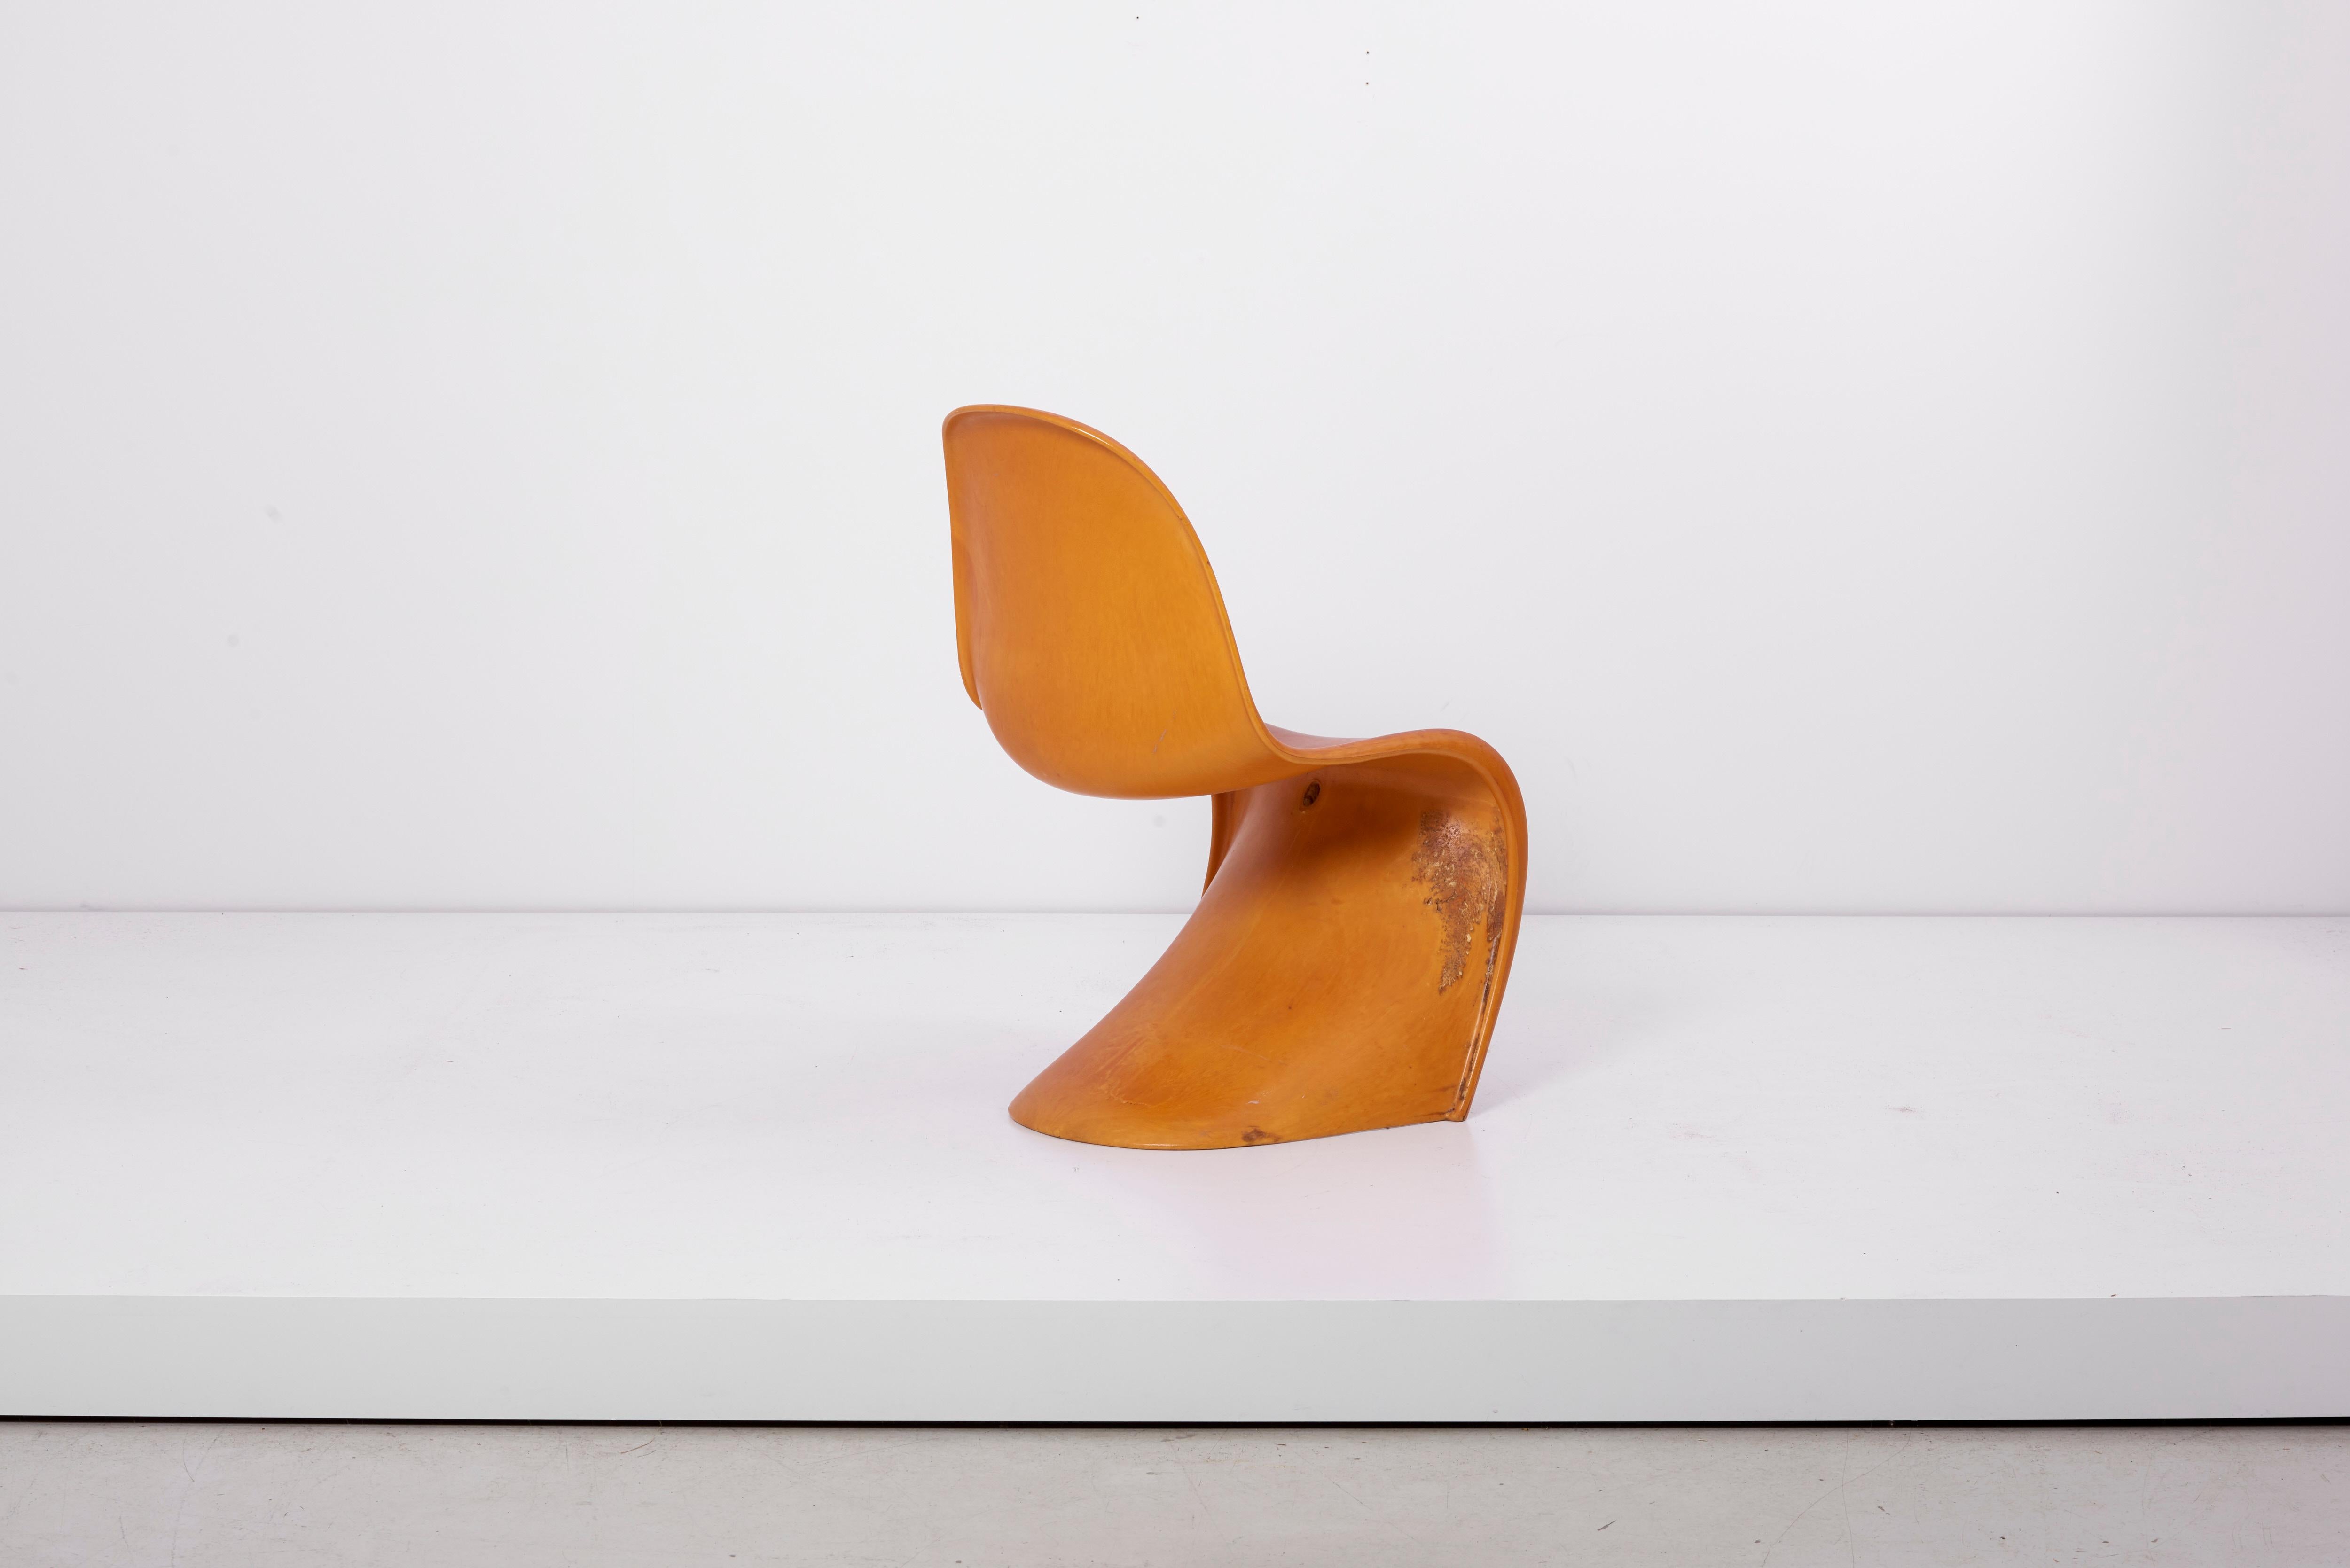 Plastic Workpiece of the Panton Chair by Verner Panton for Vitra, Germany, circa 1968